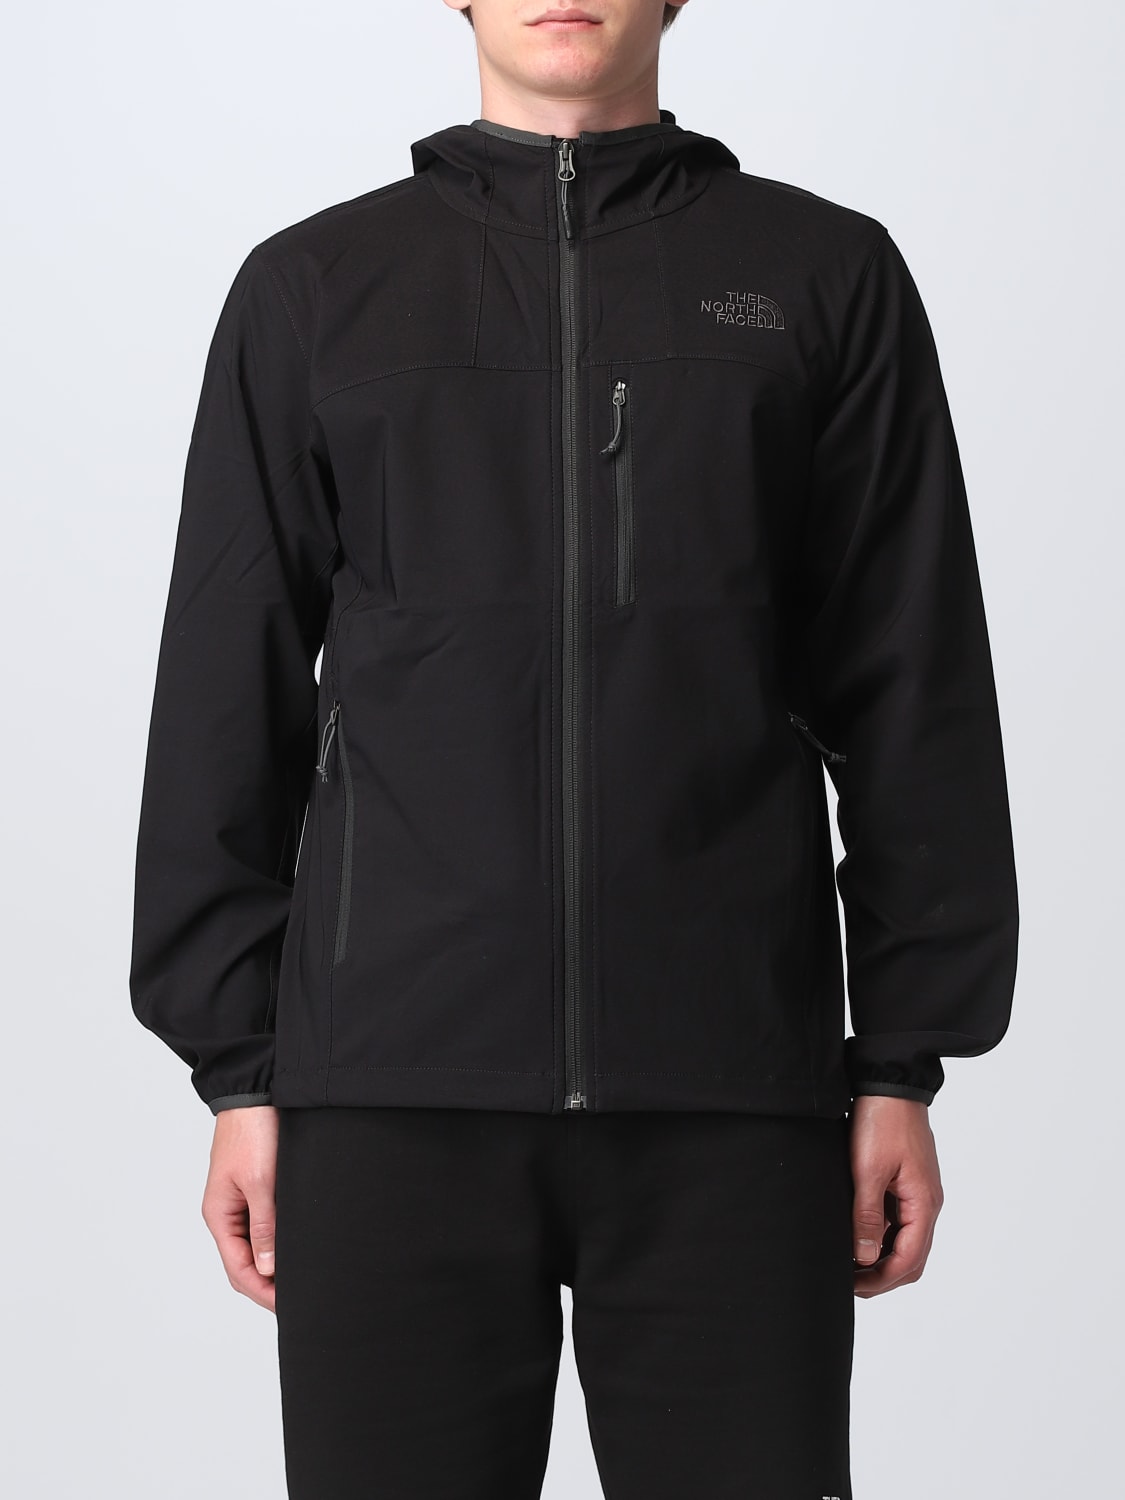 THE NORTH FACE: jacket for man - Black | The North Face jacket NF0A2XLB ...